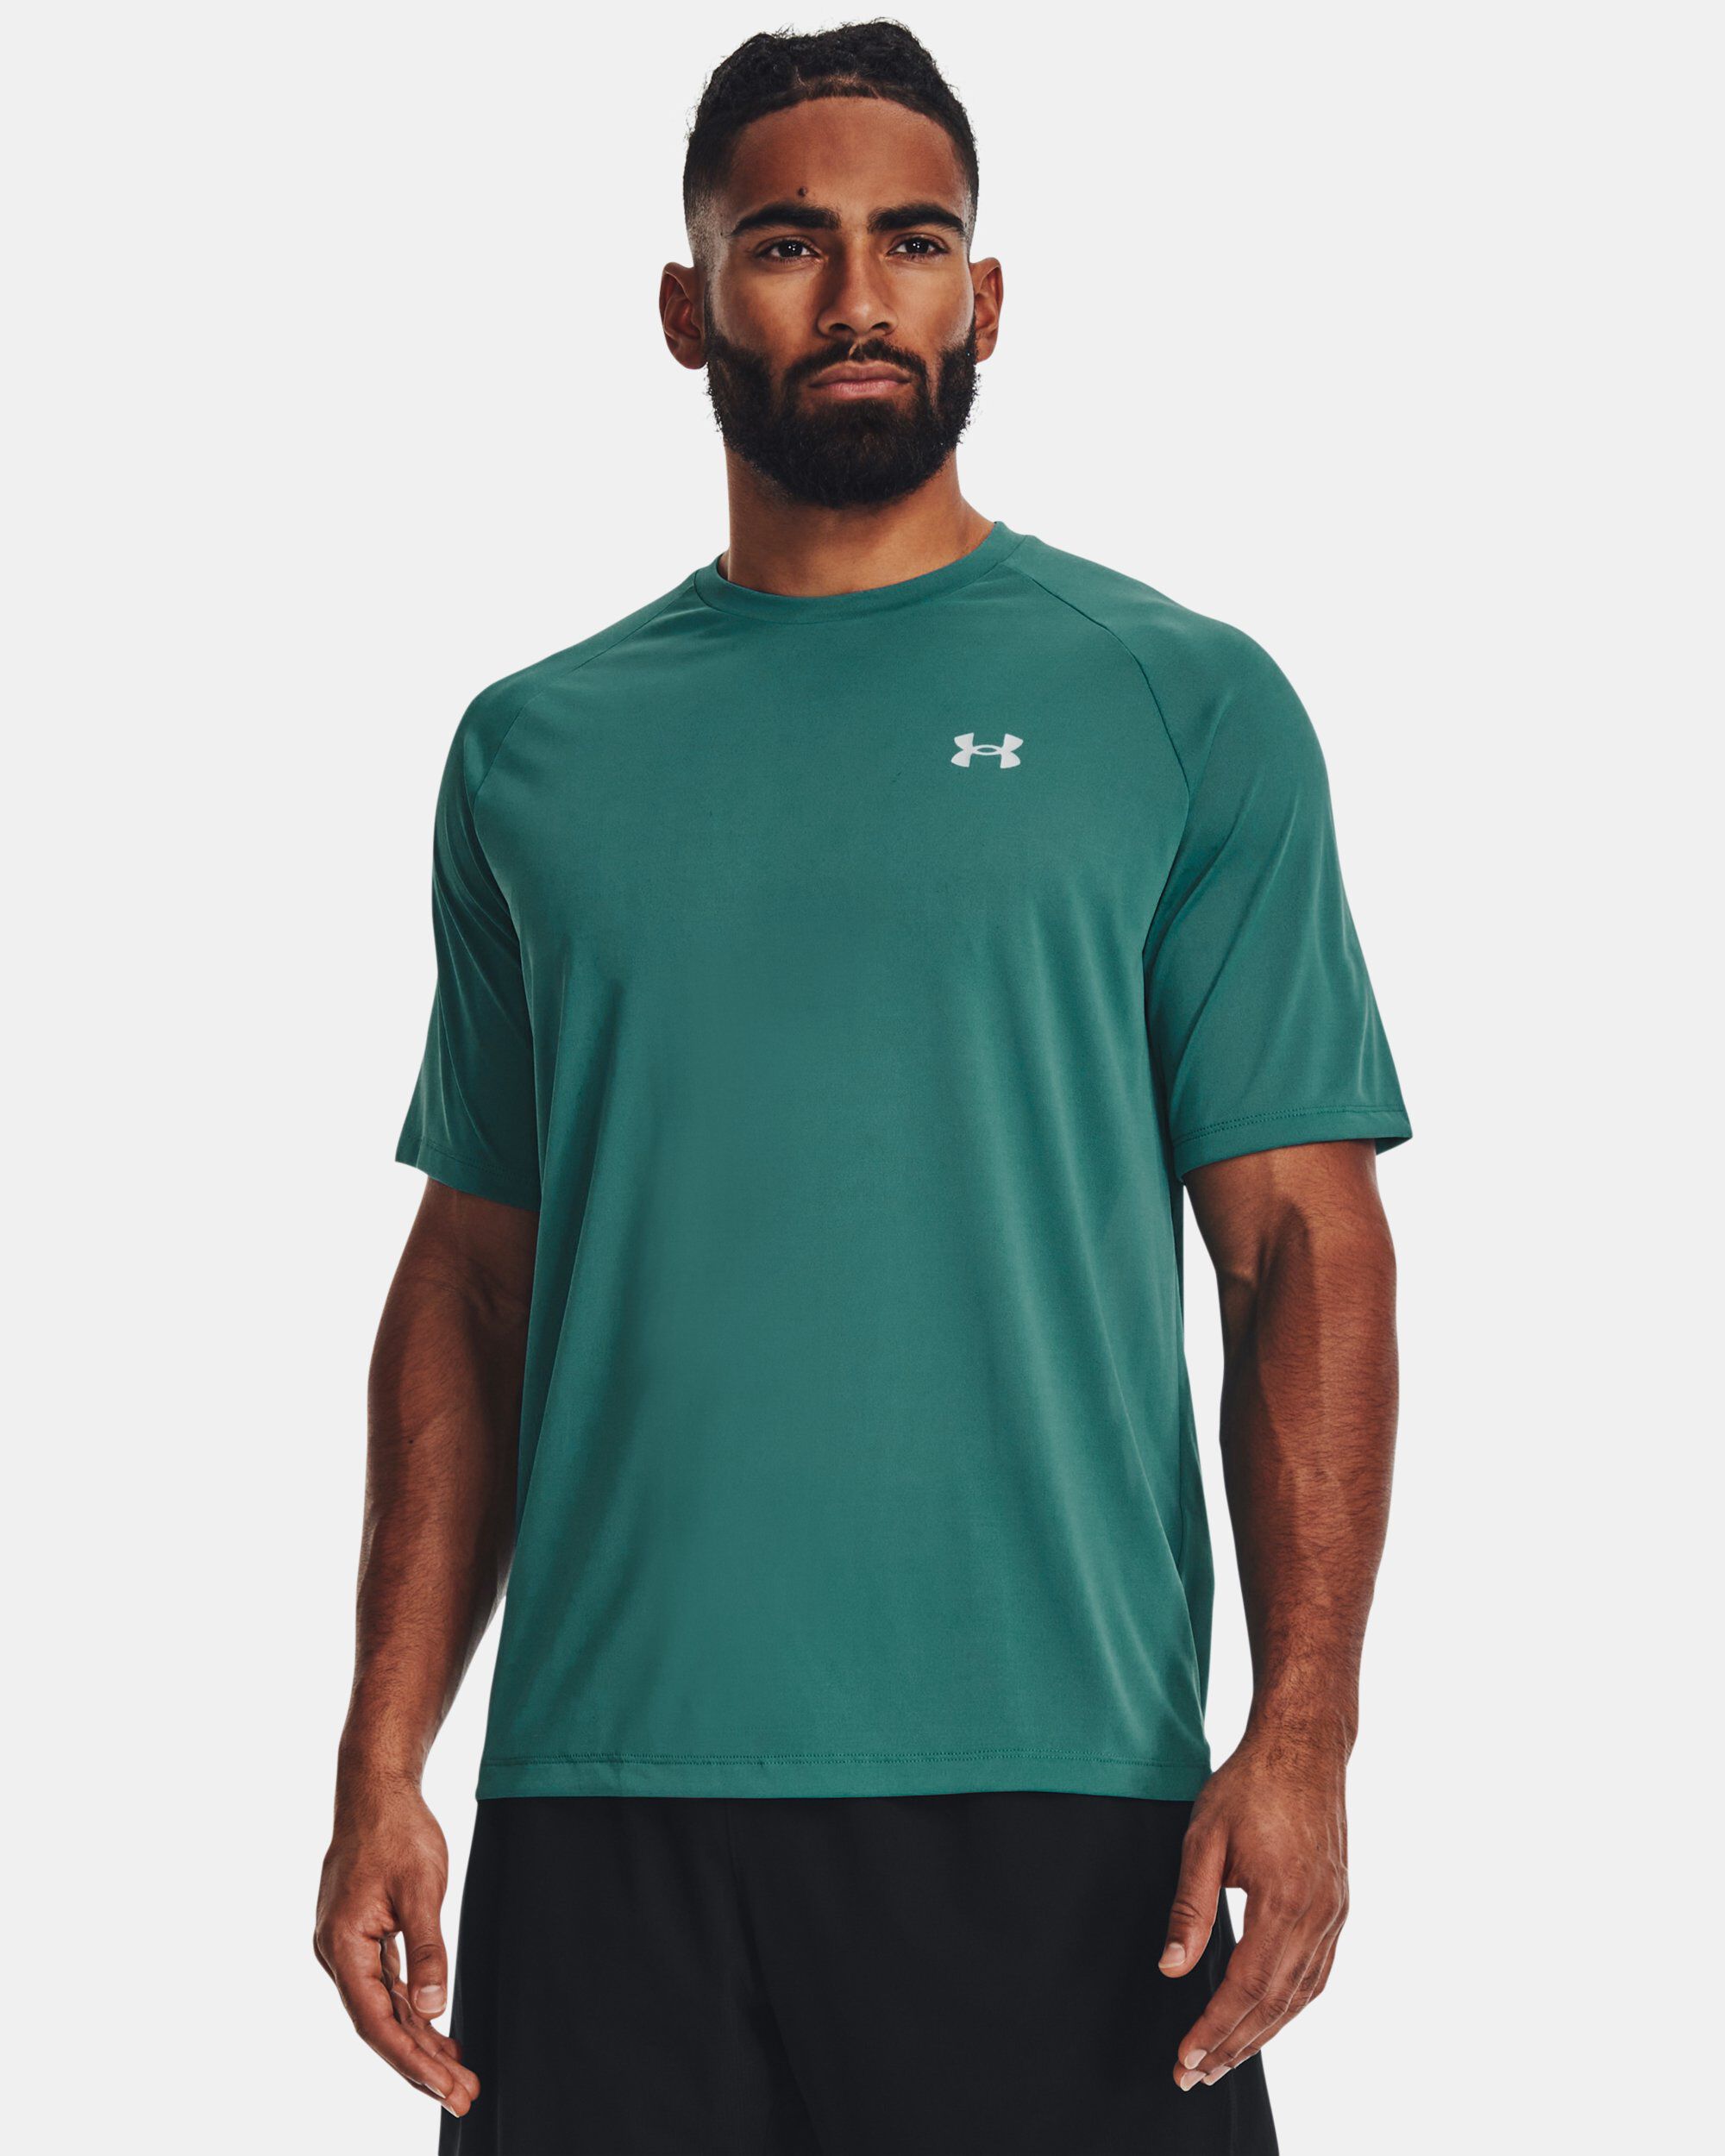 UA Pay Week Offer Collection in Dubai, UAE | Buy Online | Under Armour